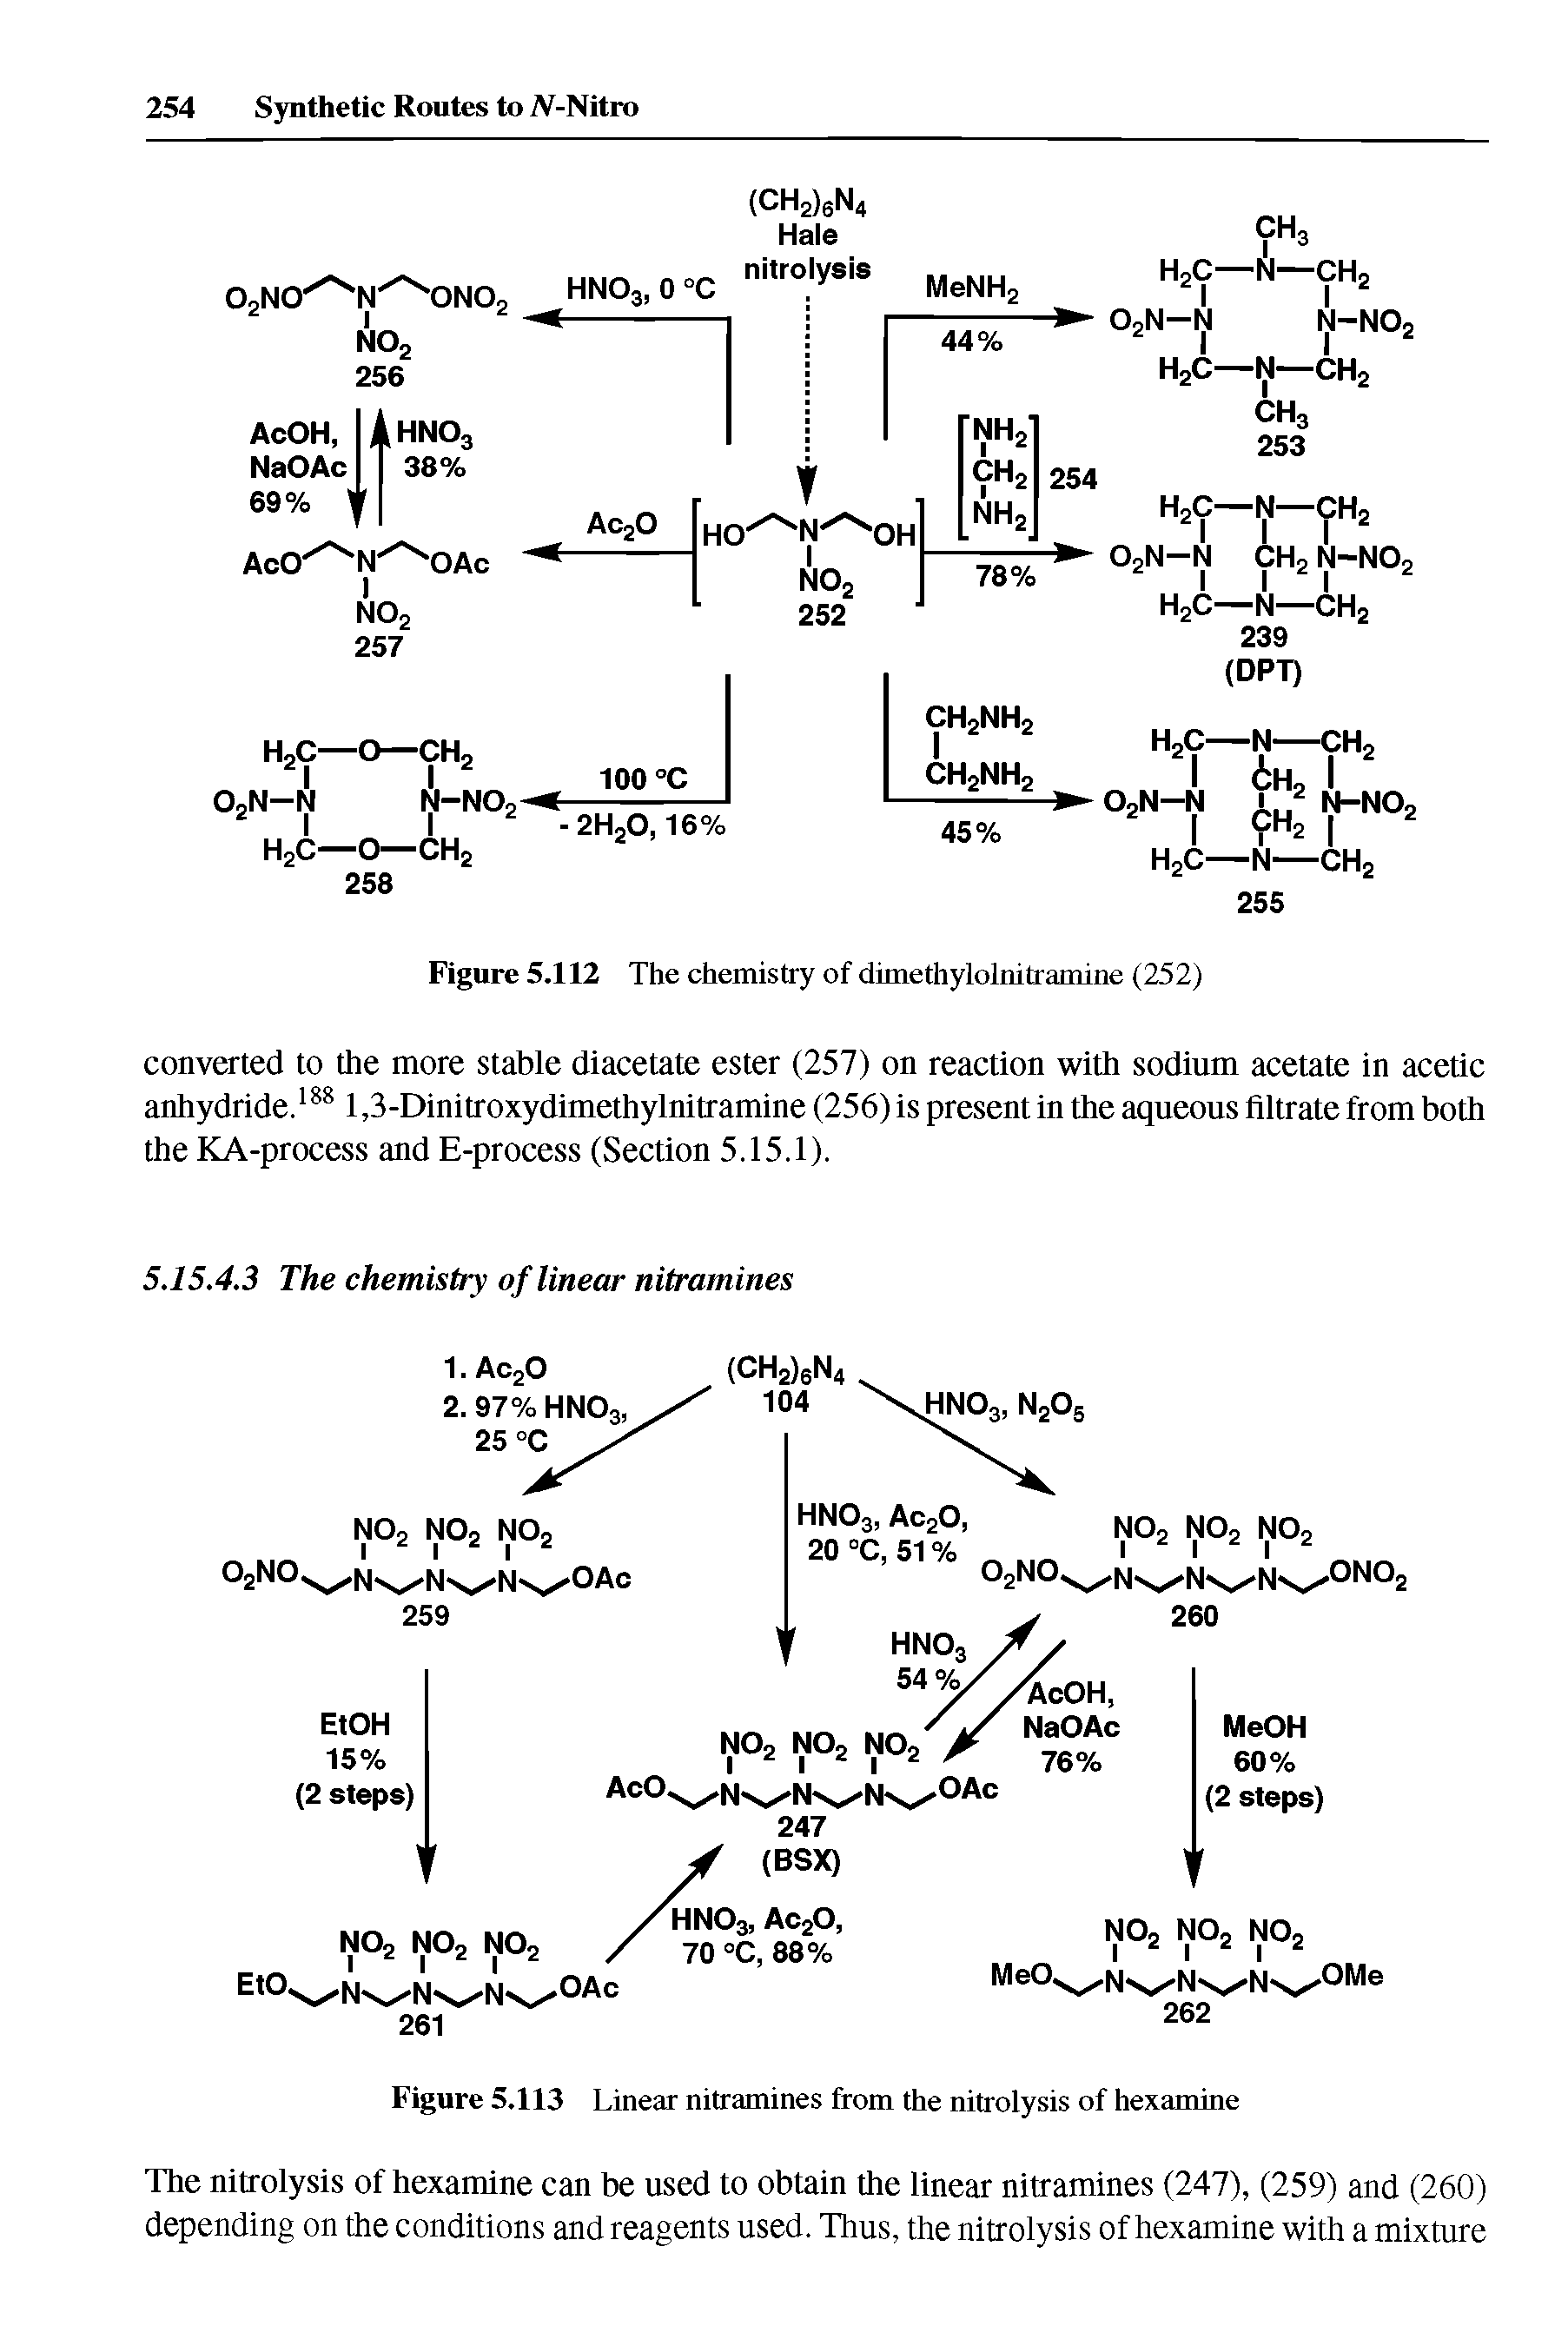 Figure 5.113 Linear nitramines from the nitrolysis of hexamine...